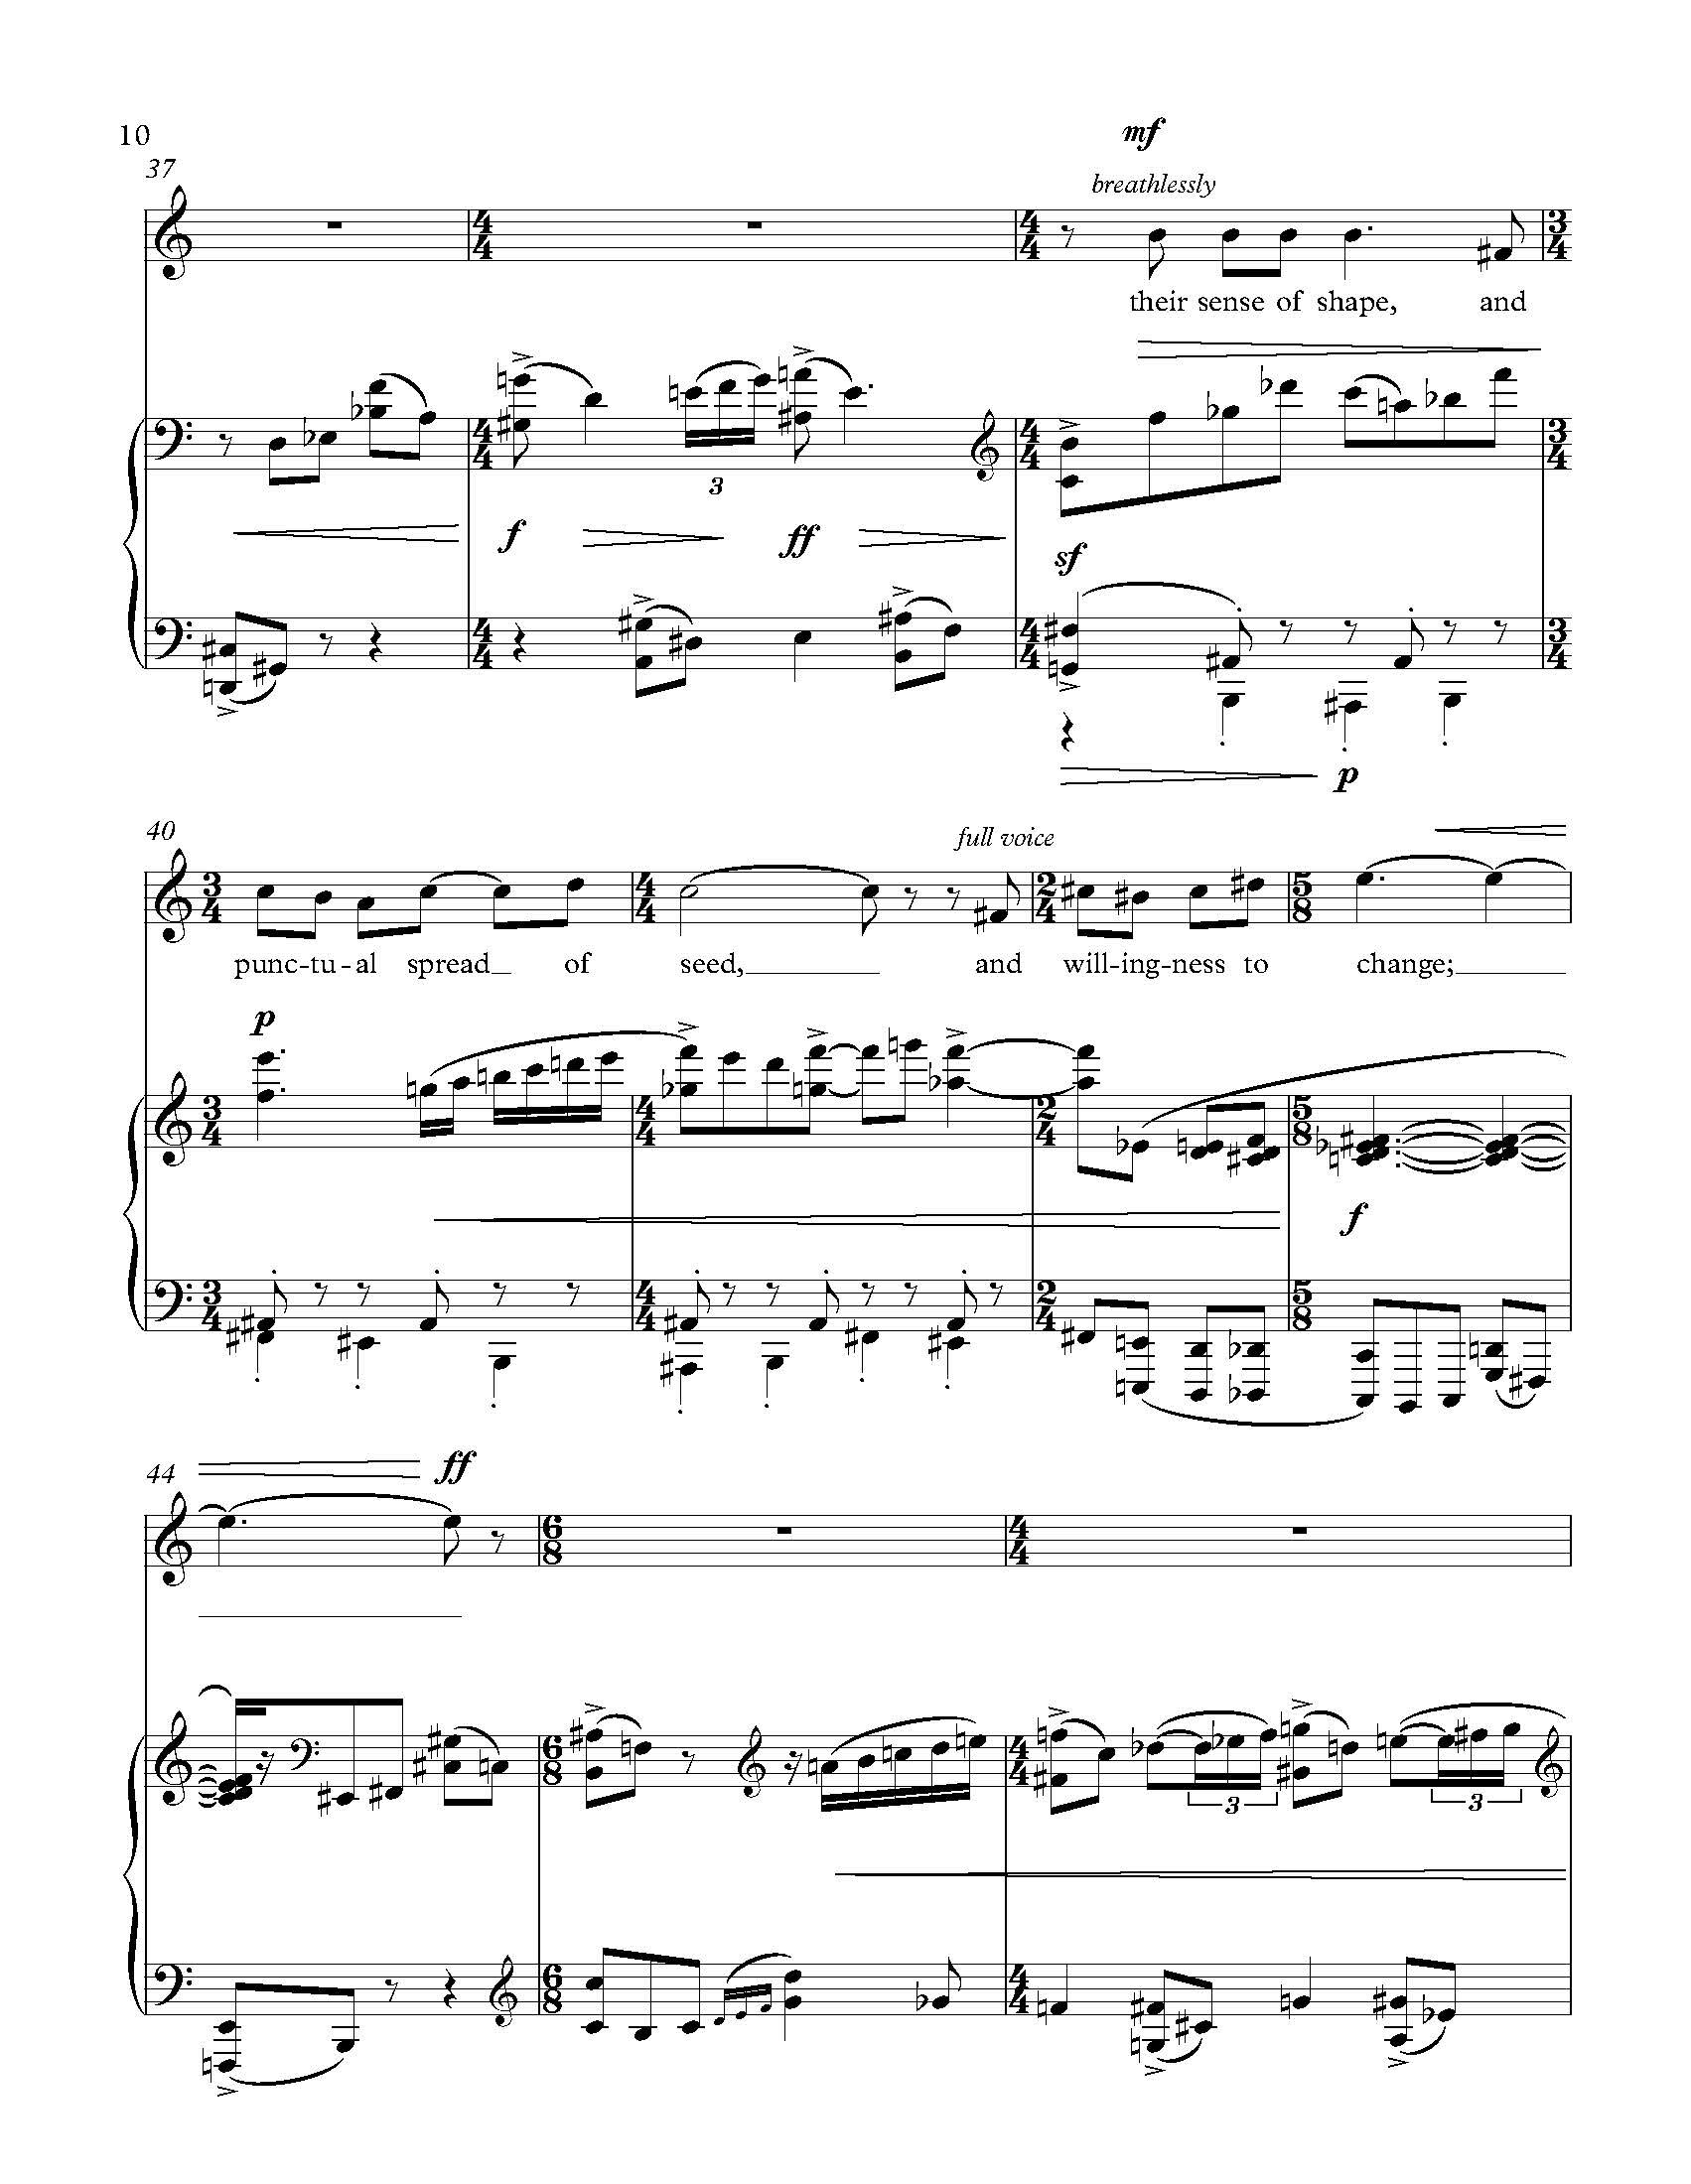 The Explosion - Complete Score_Page_16.jpg